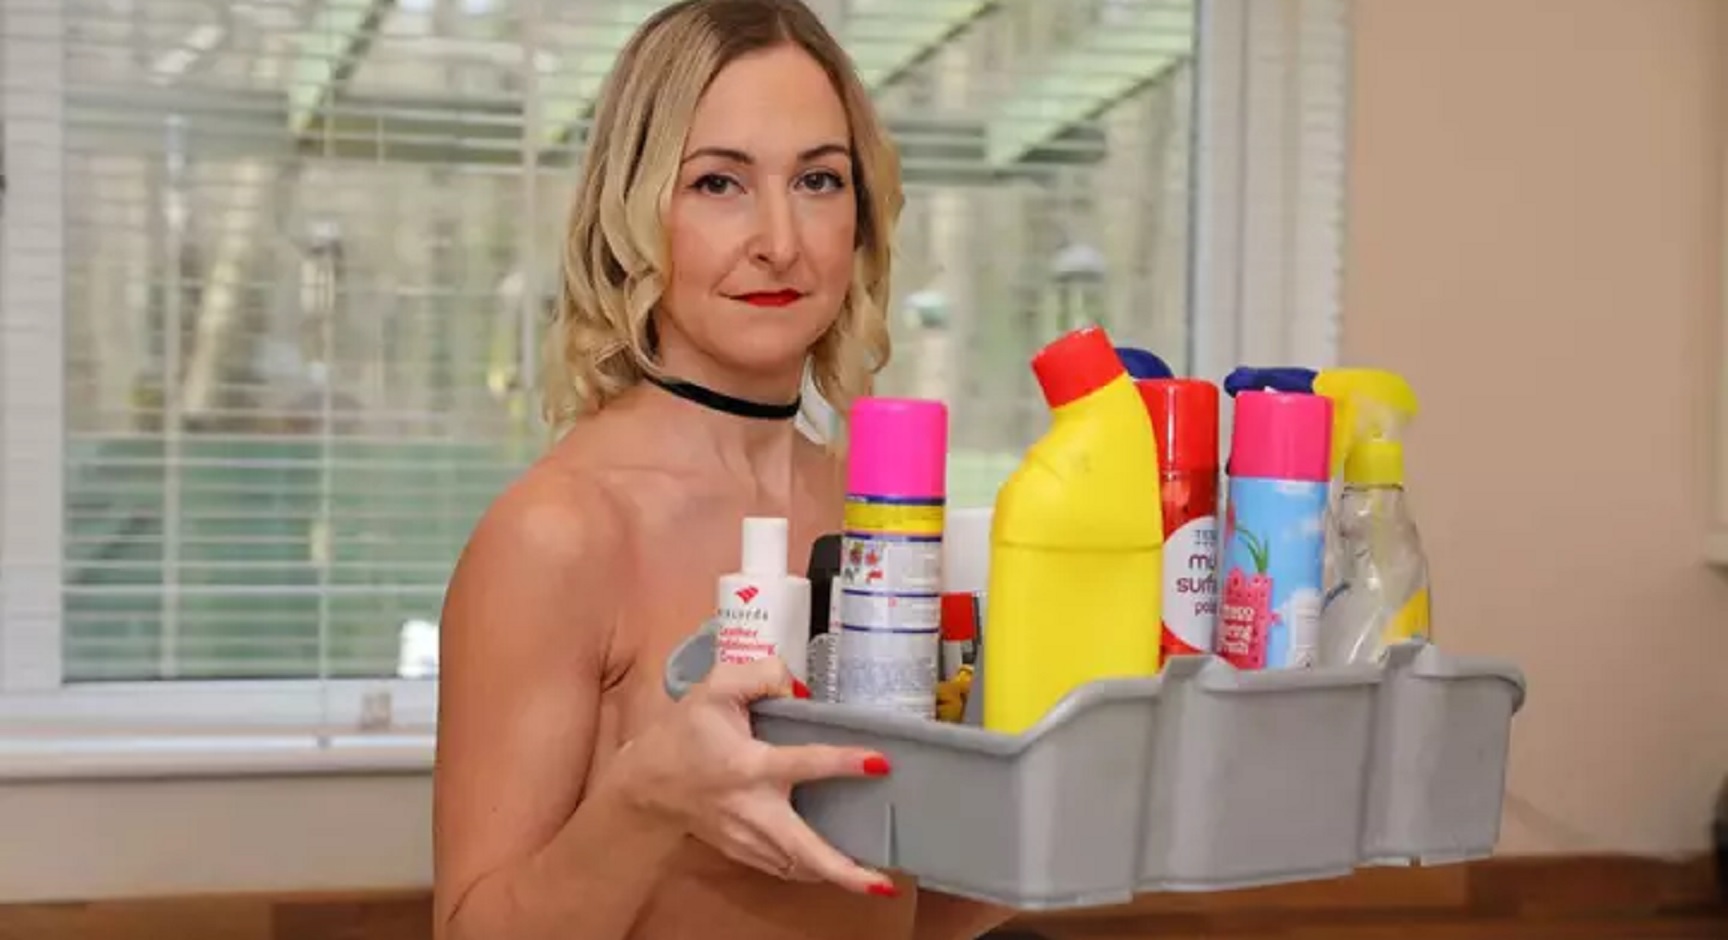 Mum-of-Three Has Launched Naked Cleaning Service, Charging £95 An Hour